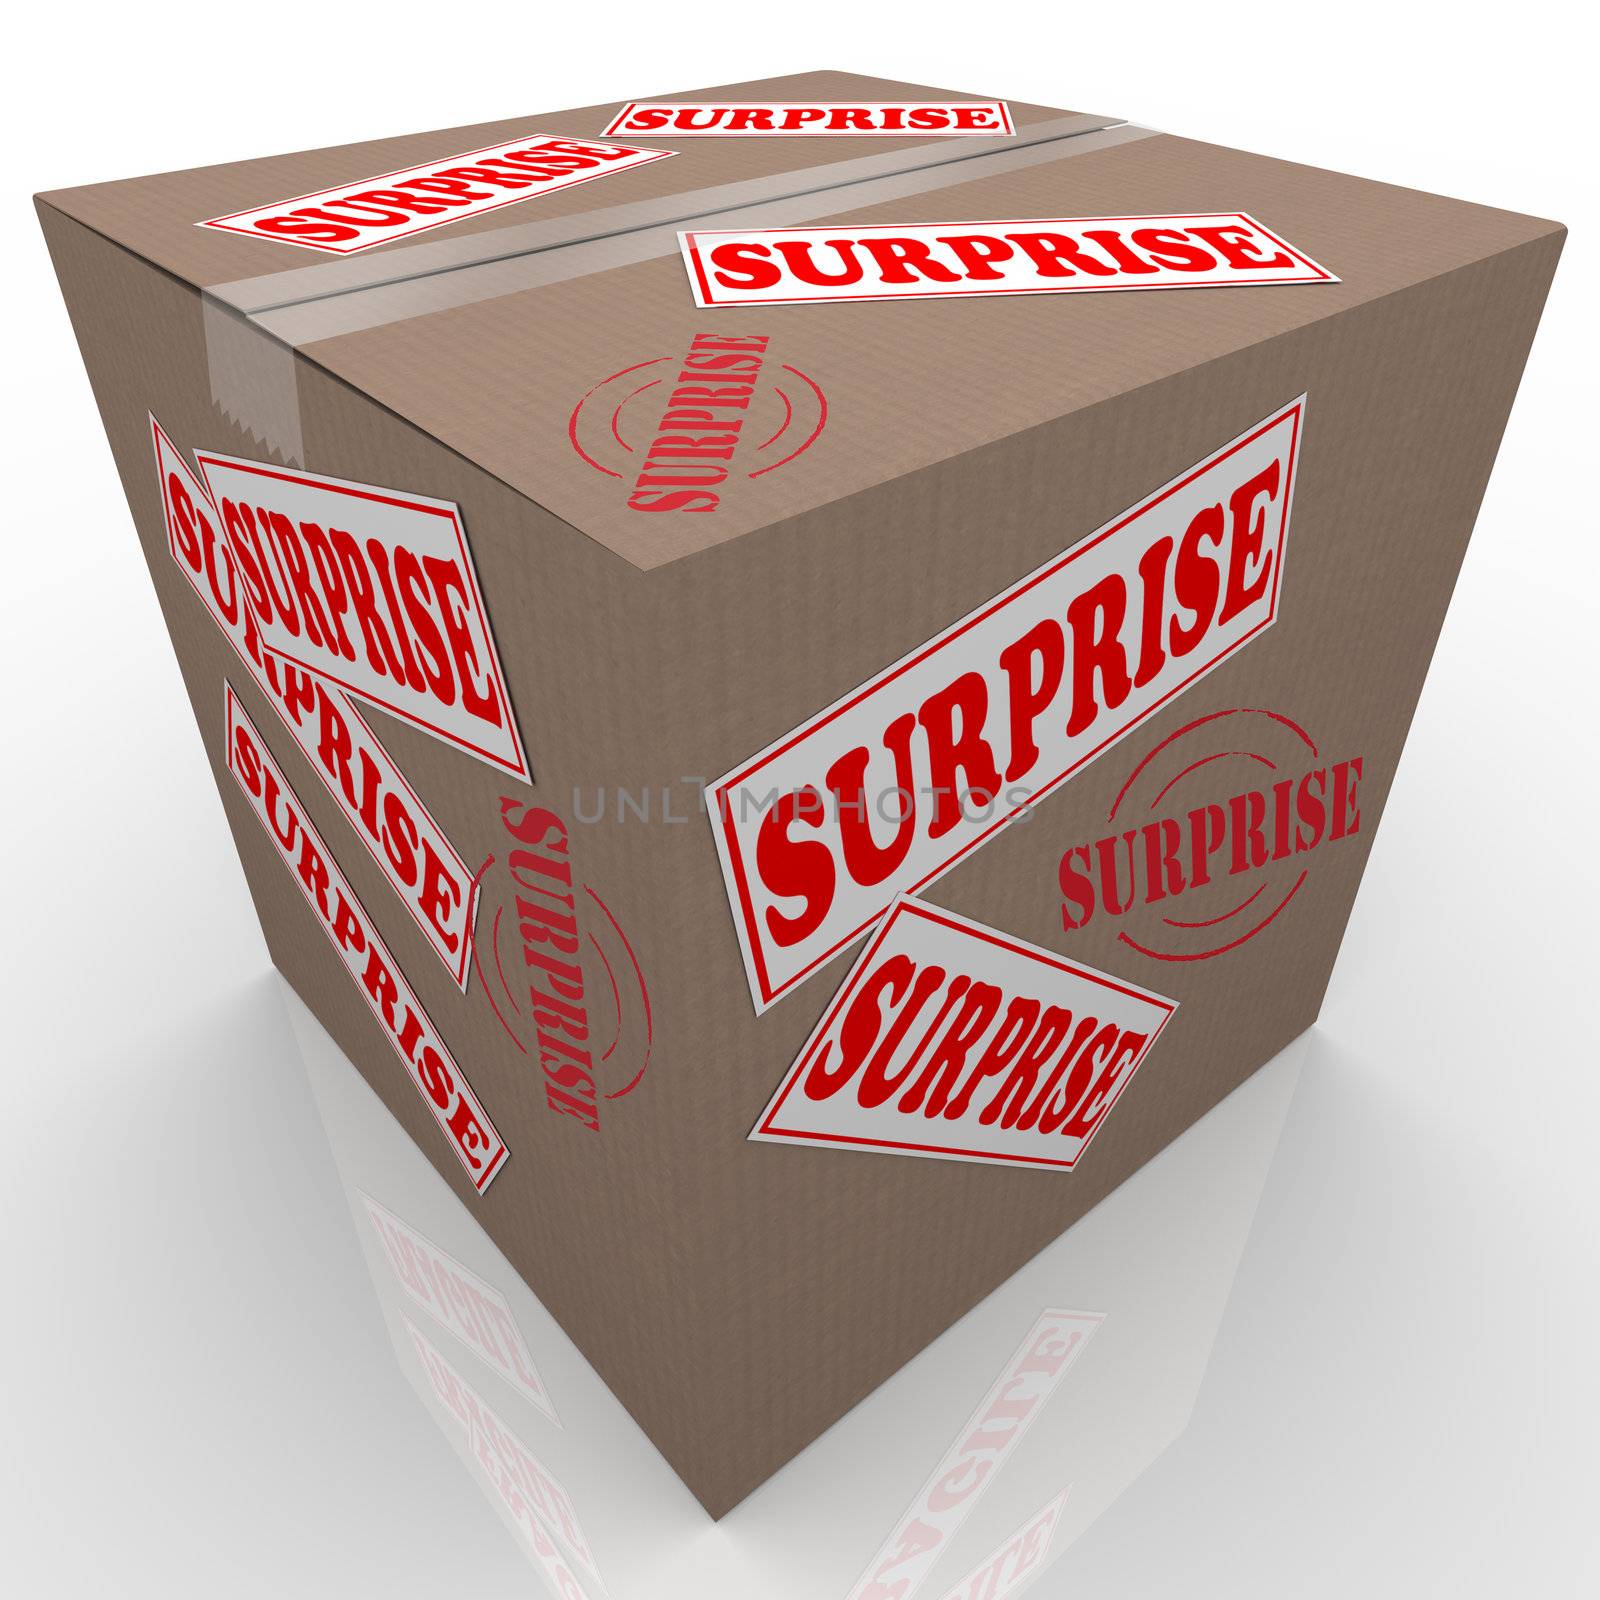 A cardboard box with stickers and stamps reading Surprise, representing a gift, present or other mystery item sent to you through the mail